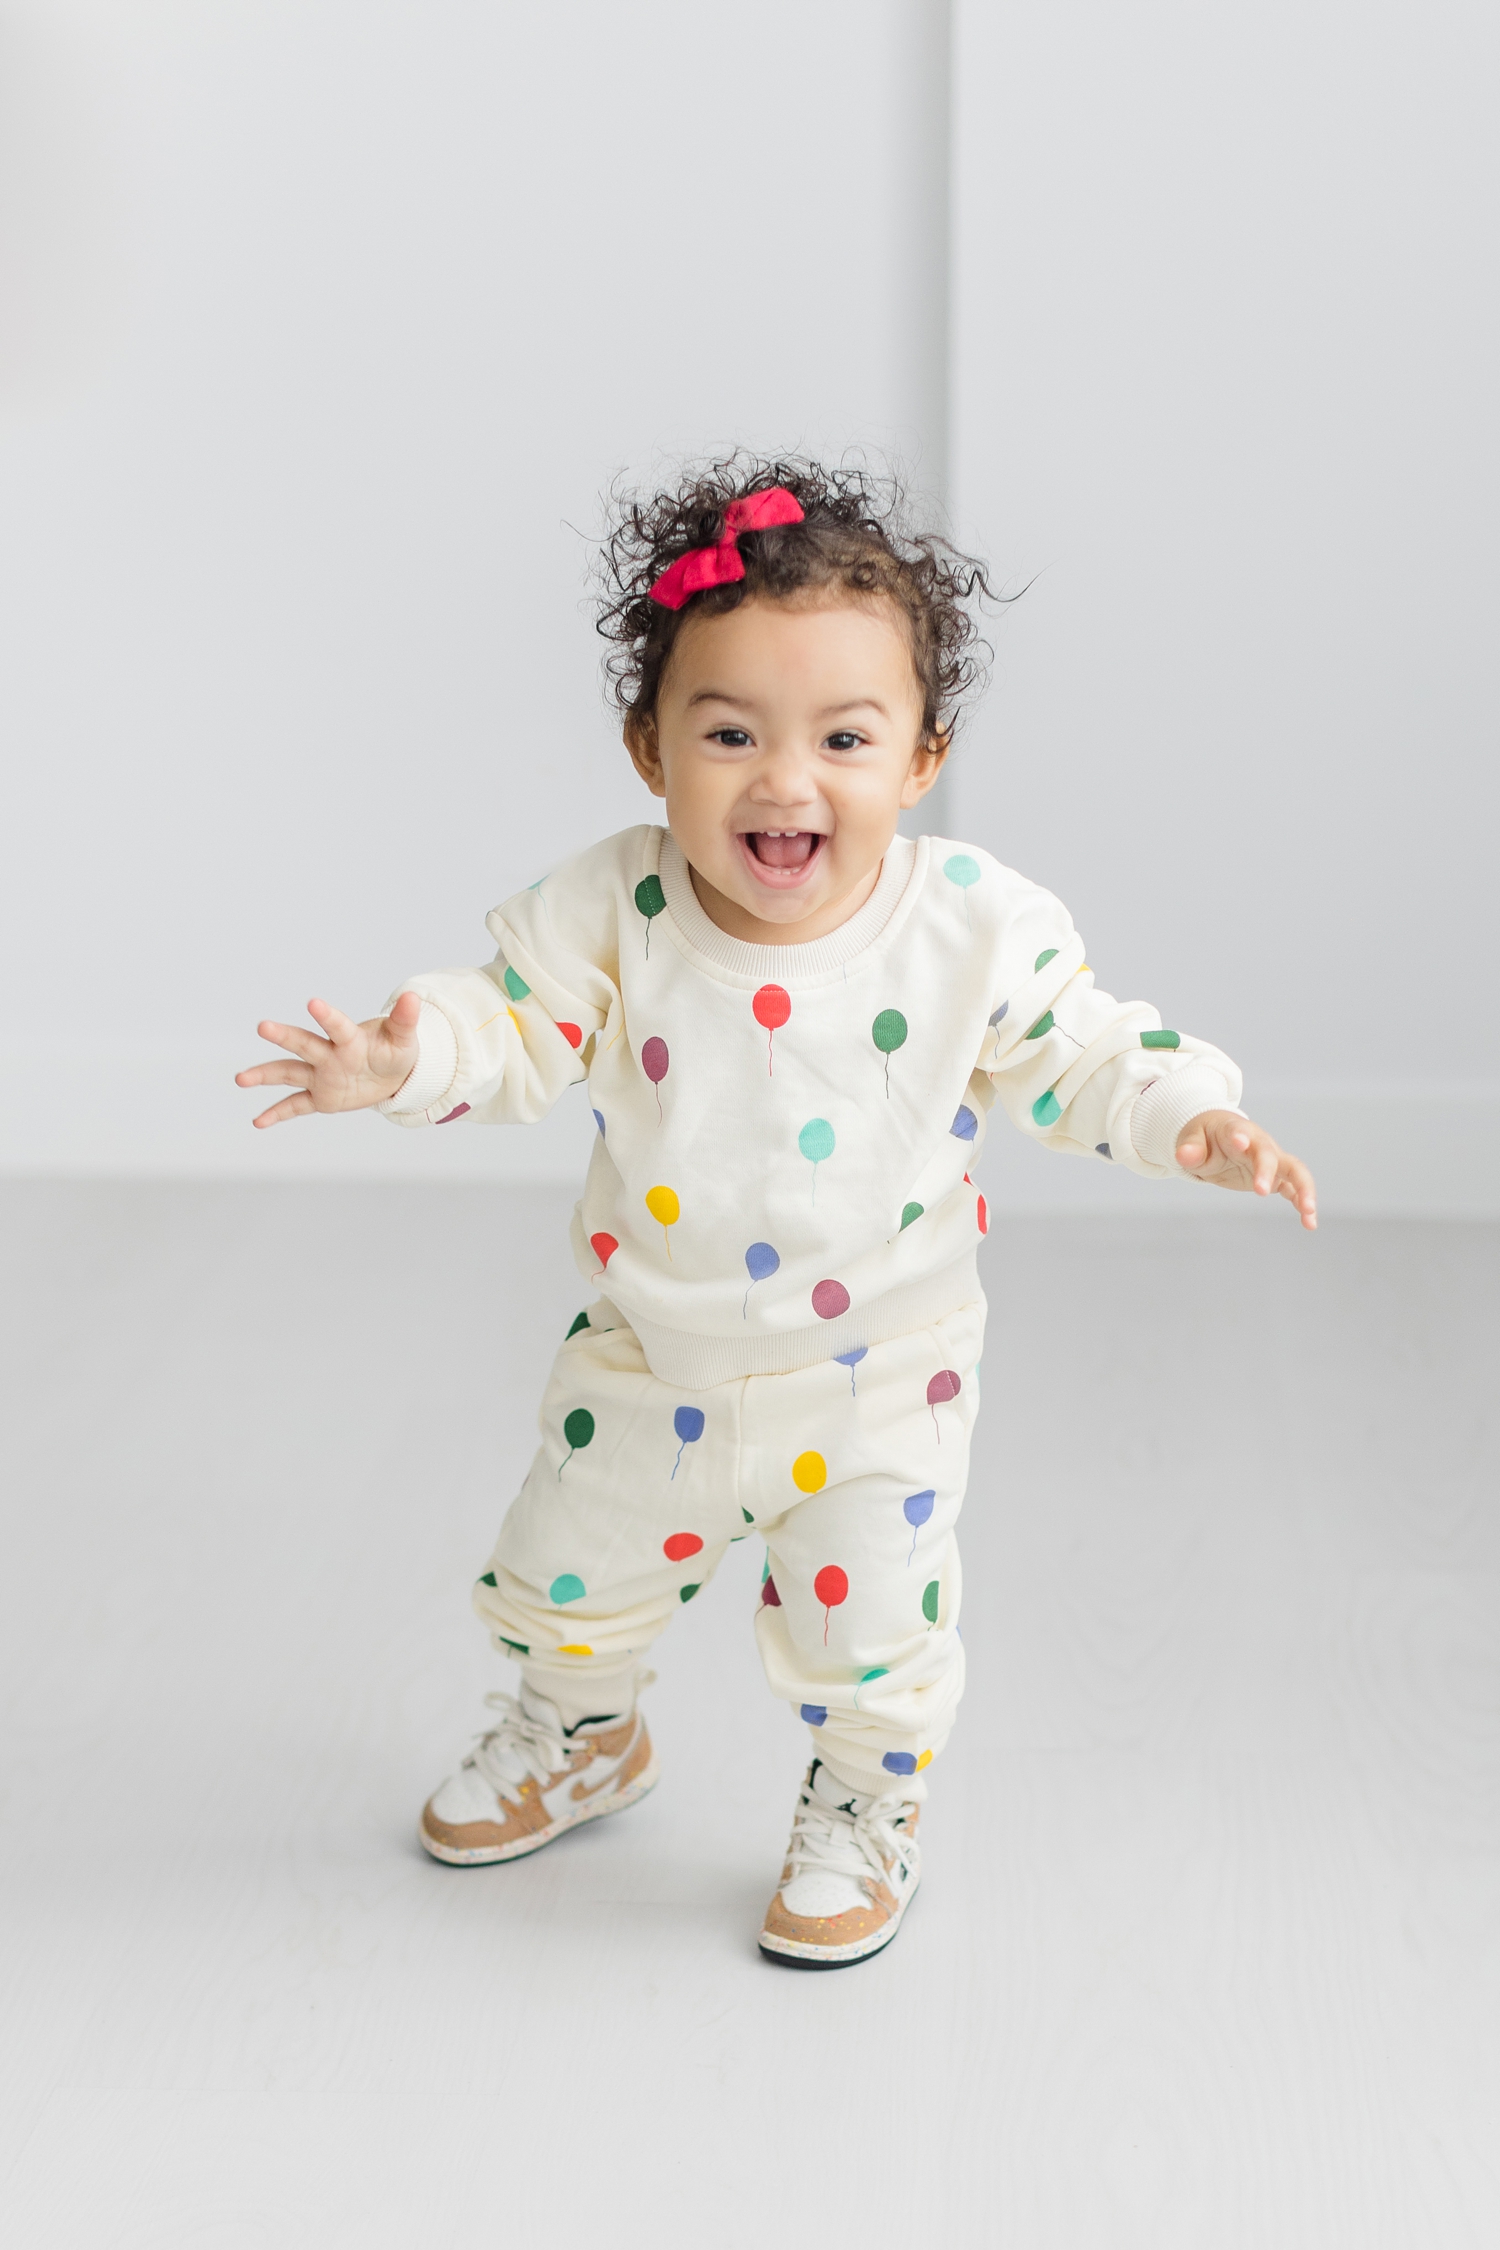 Baby Zoey full of smiles and excitement wearing a cream sweat set sprinkled with colorful balloons | CB Studio